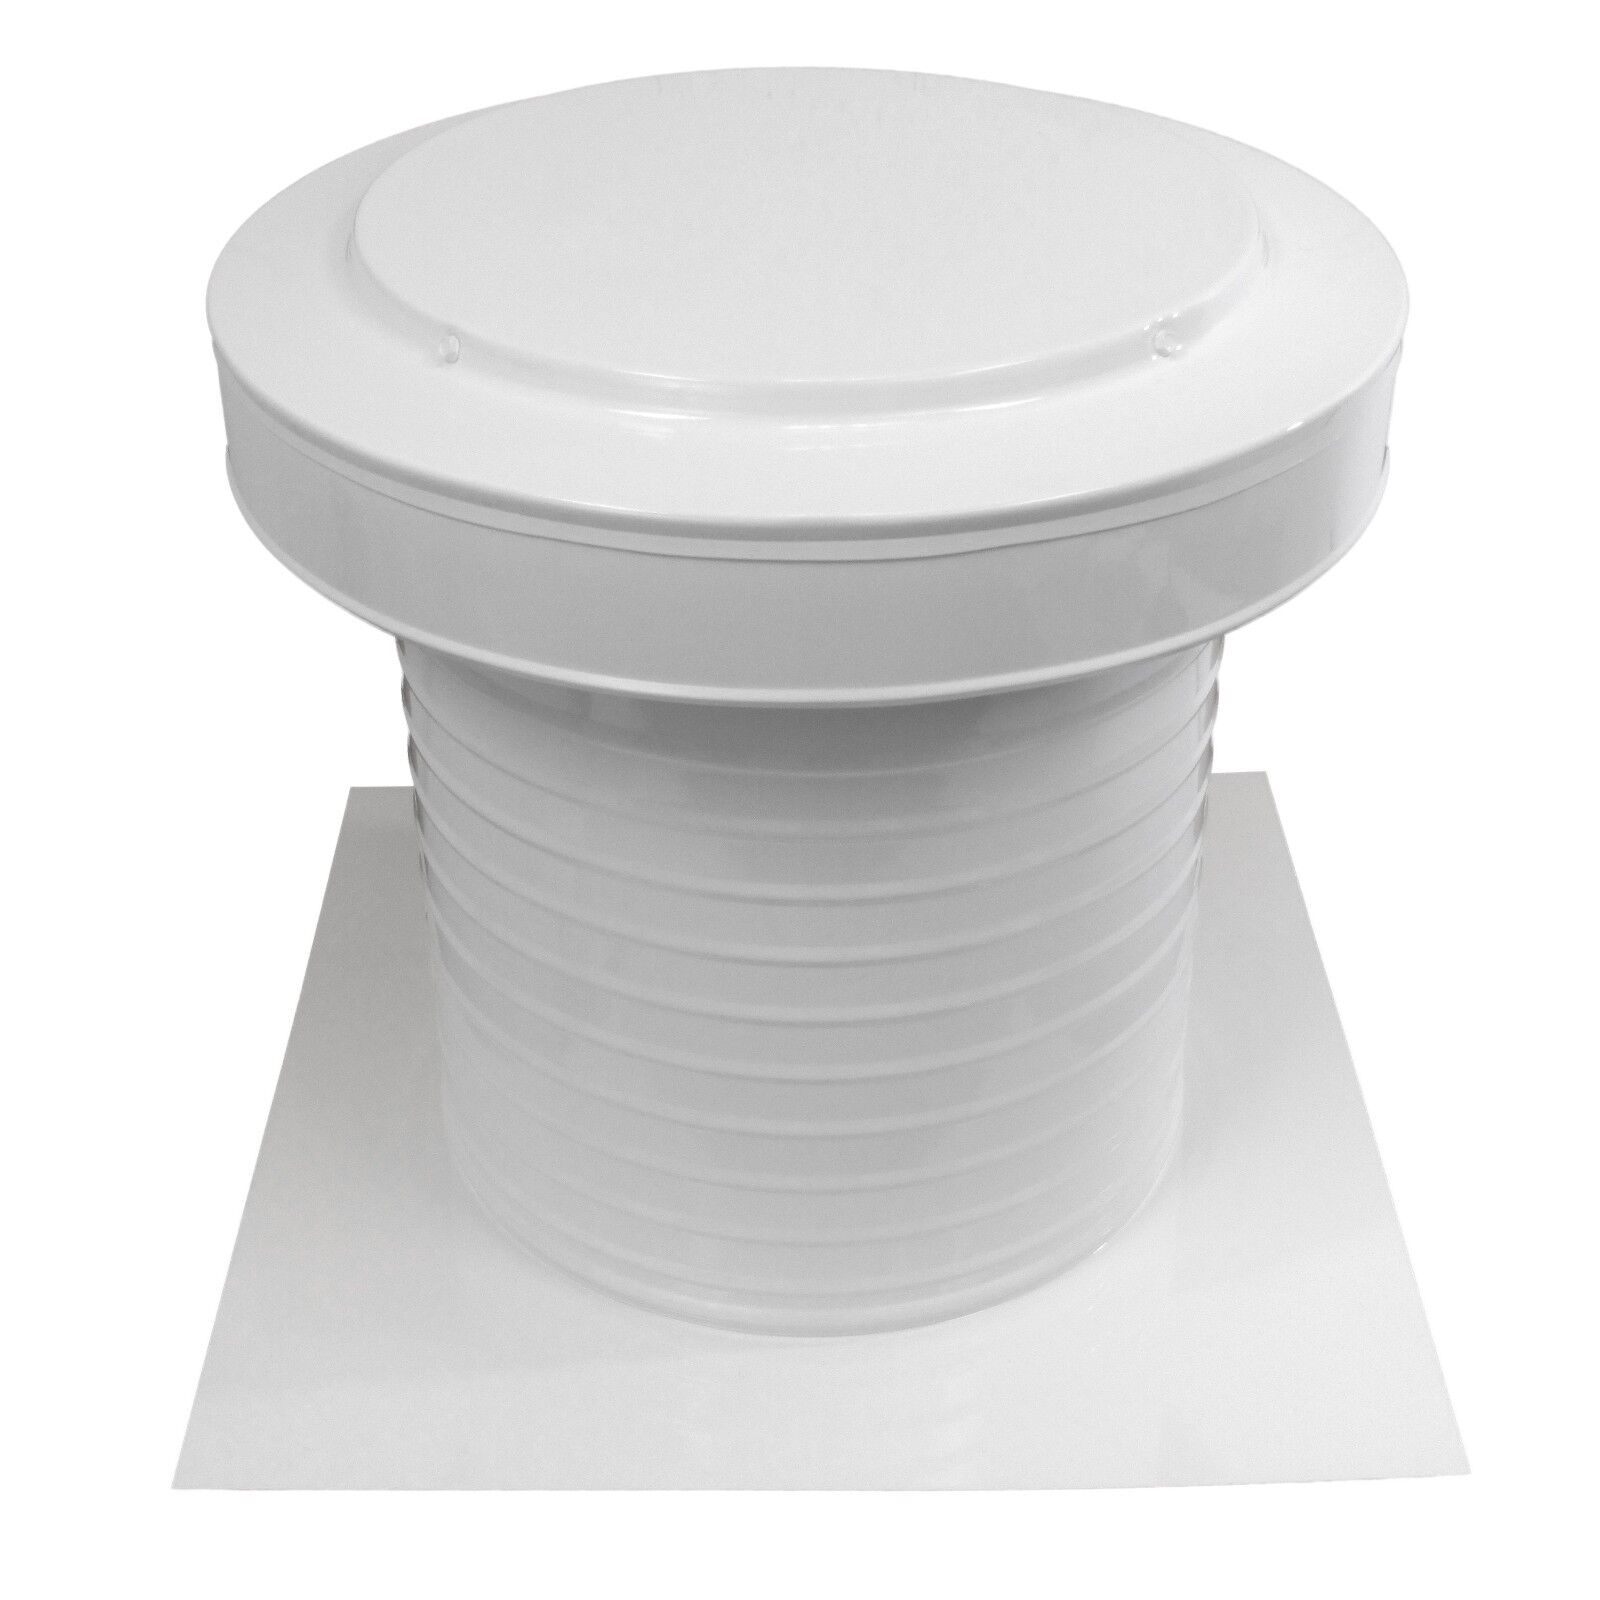 12 Inch Diameter Keepa Vent An Aluminum Roof Vent For Flat Roofs In White